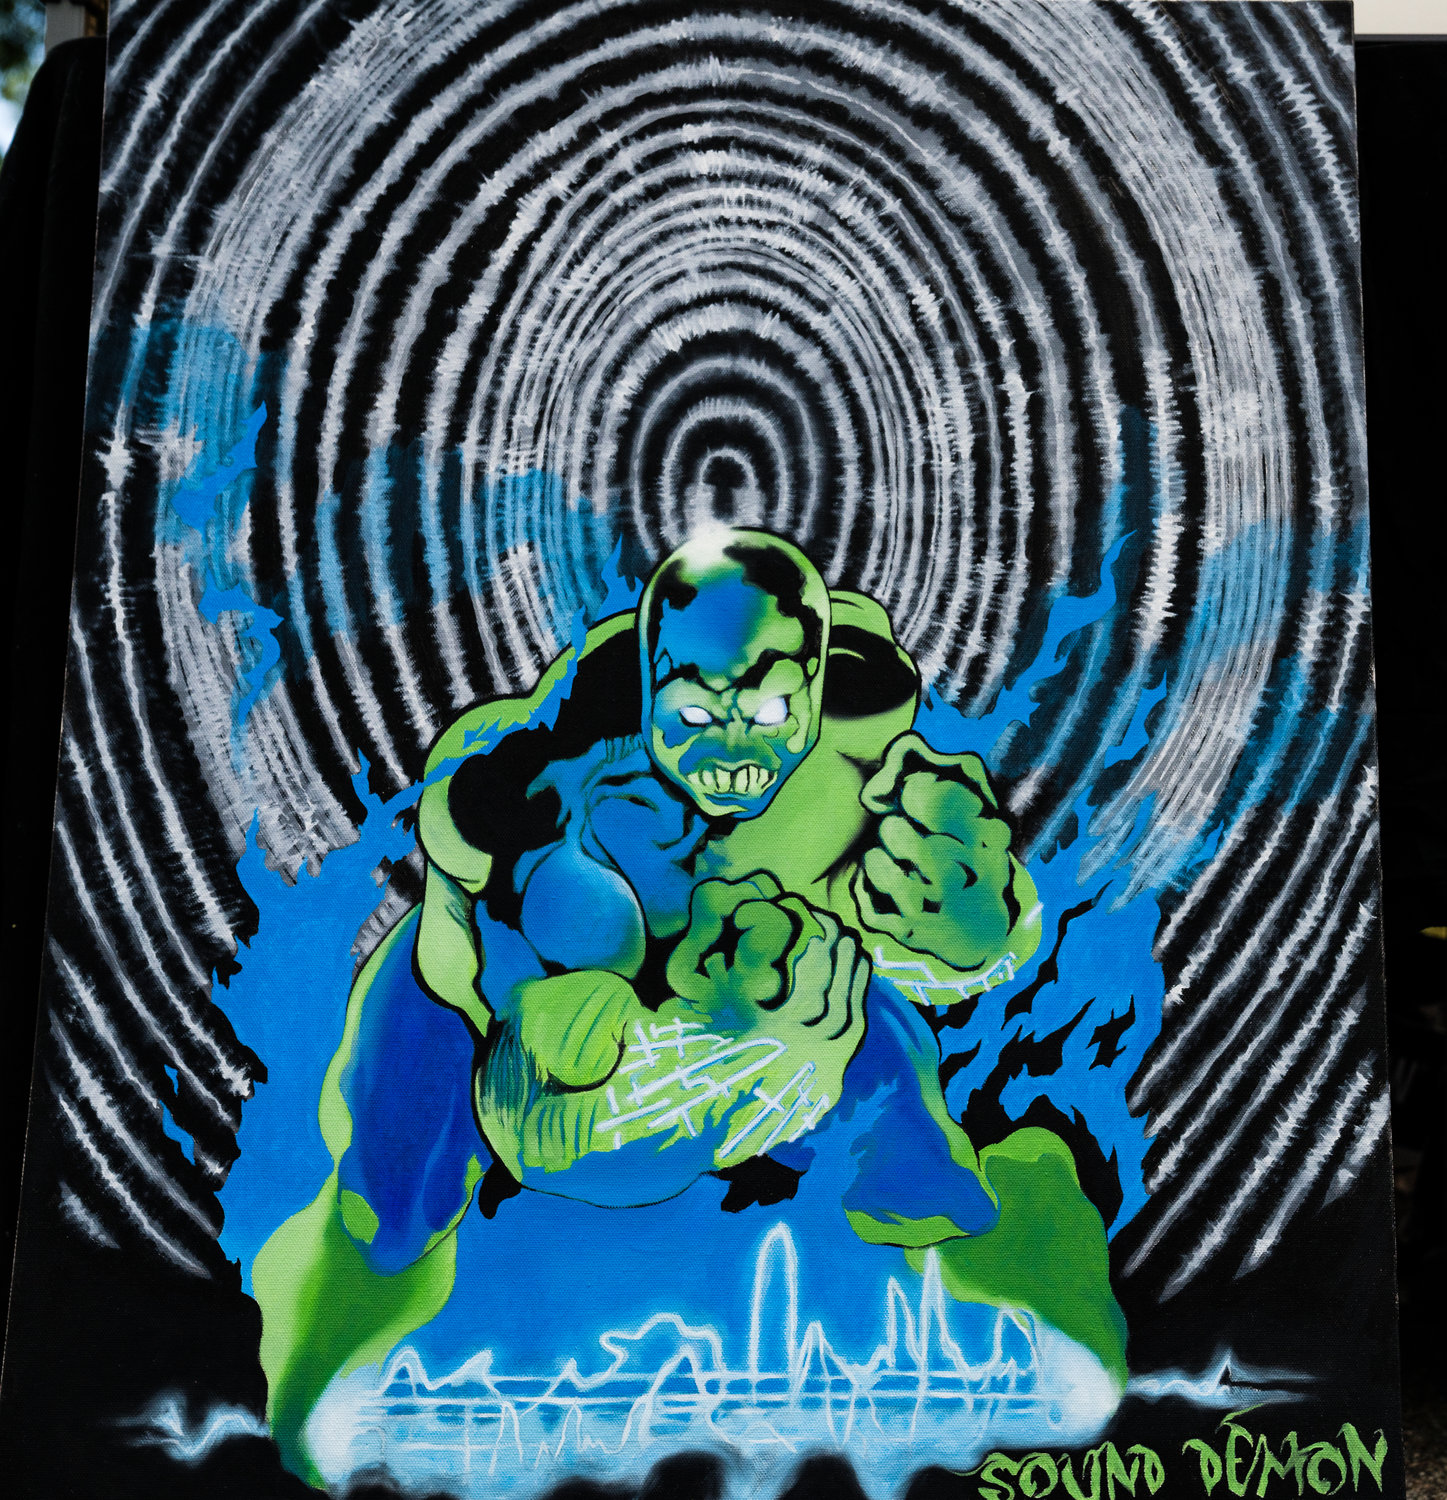 Ken Jackson’s superhero-inspired work invites the viewer into a world of powerful but misunderstand beings that are desperate to convey their strengths, but destined to reveal their weaknesses. The tantalizing, thumbprint-like background of the piece is engaging and maddening to the viewer as it aims to hypnotize and destabilize.